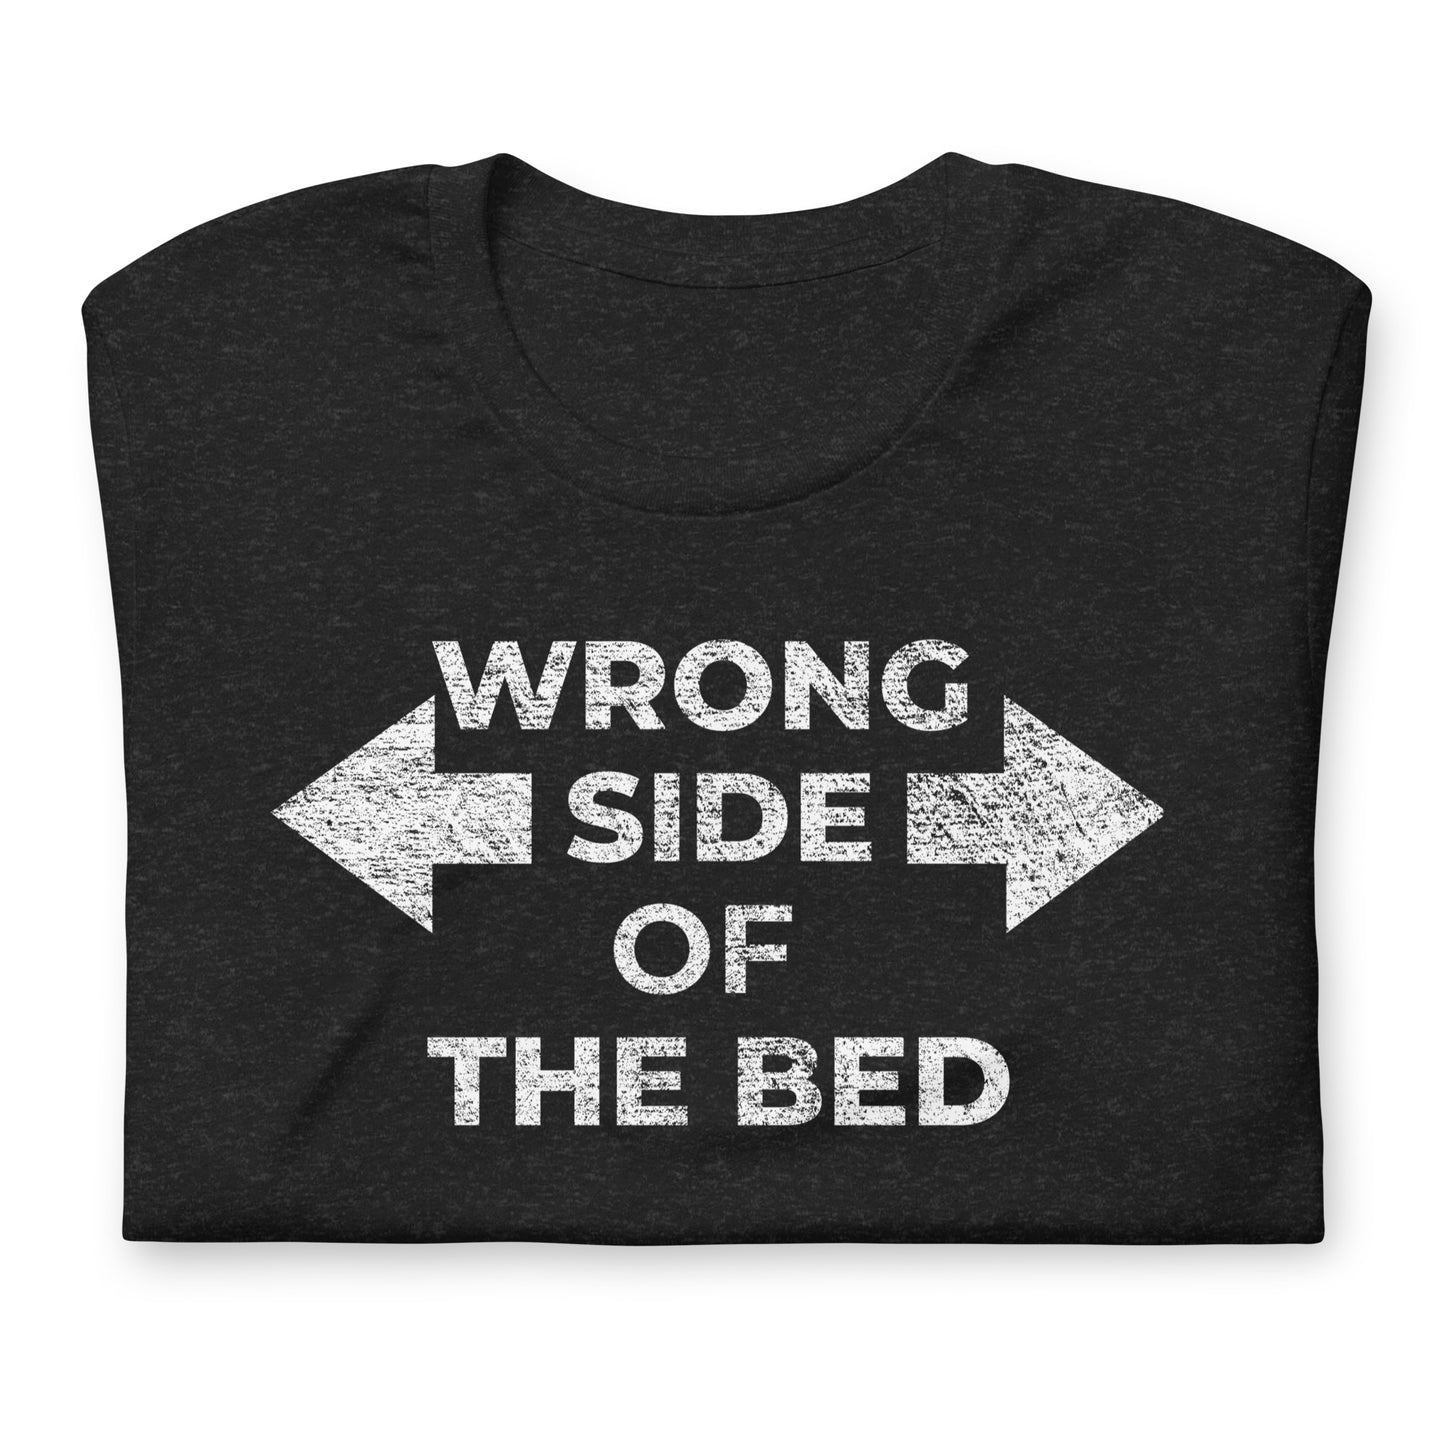 WRONG SIDE OF THE BED, Graphic Tee Shirt, Black